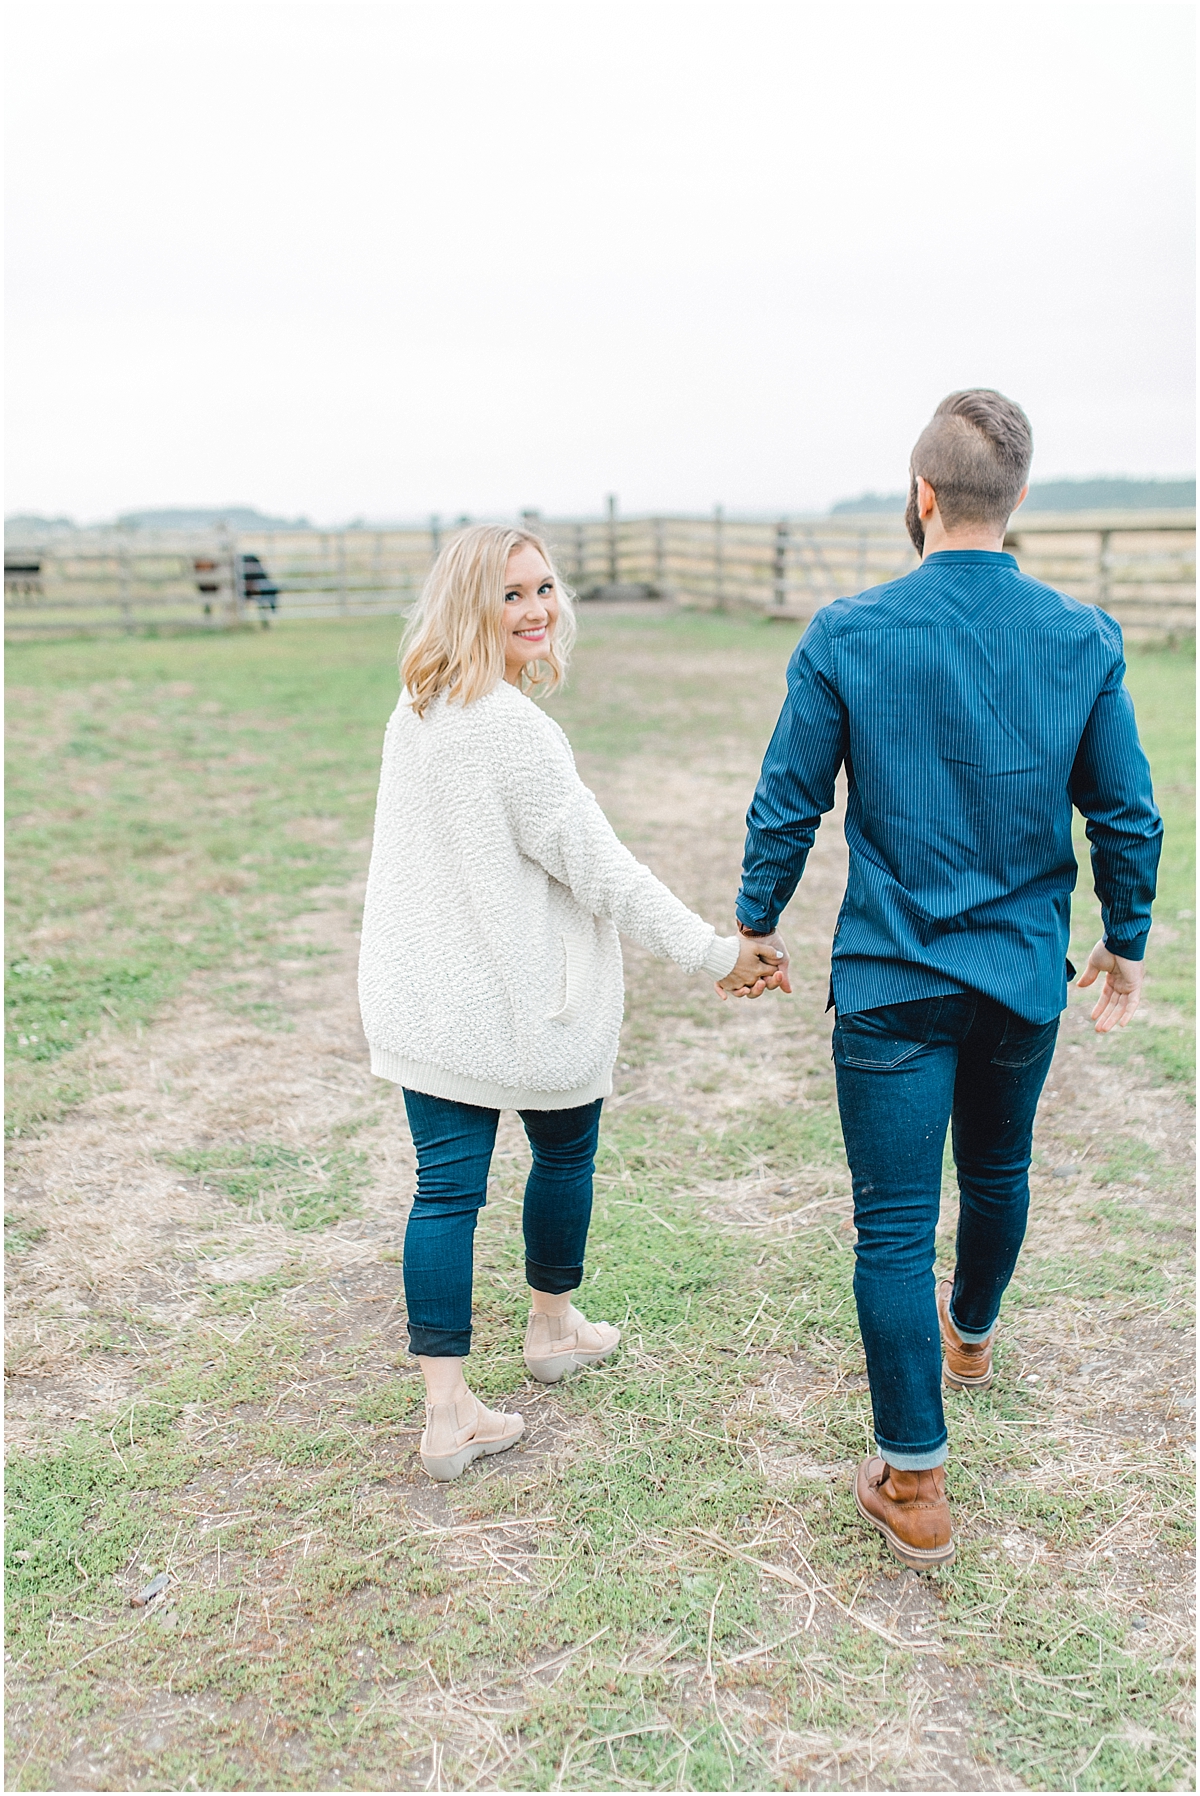 Emma Rose Company | PNW Engagement Session | What to Wear for Pictures | Rose Ranch Engagement | Sunset | Kindred Presets | Seattle Wedding Photographer Light and Airy_0280.jpg